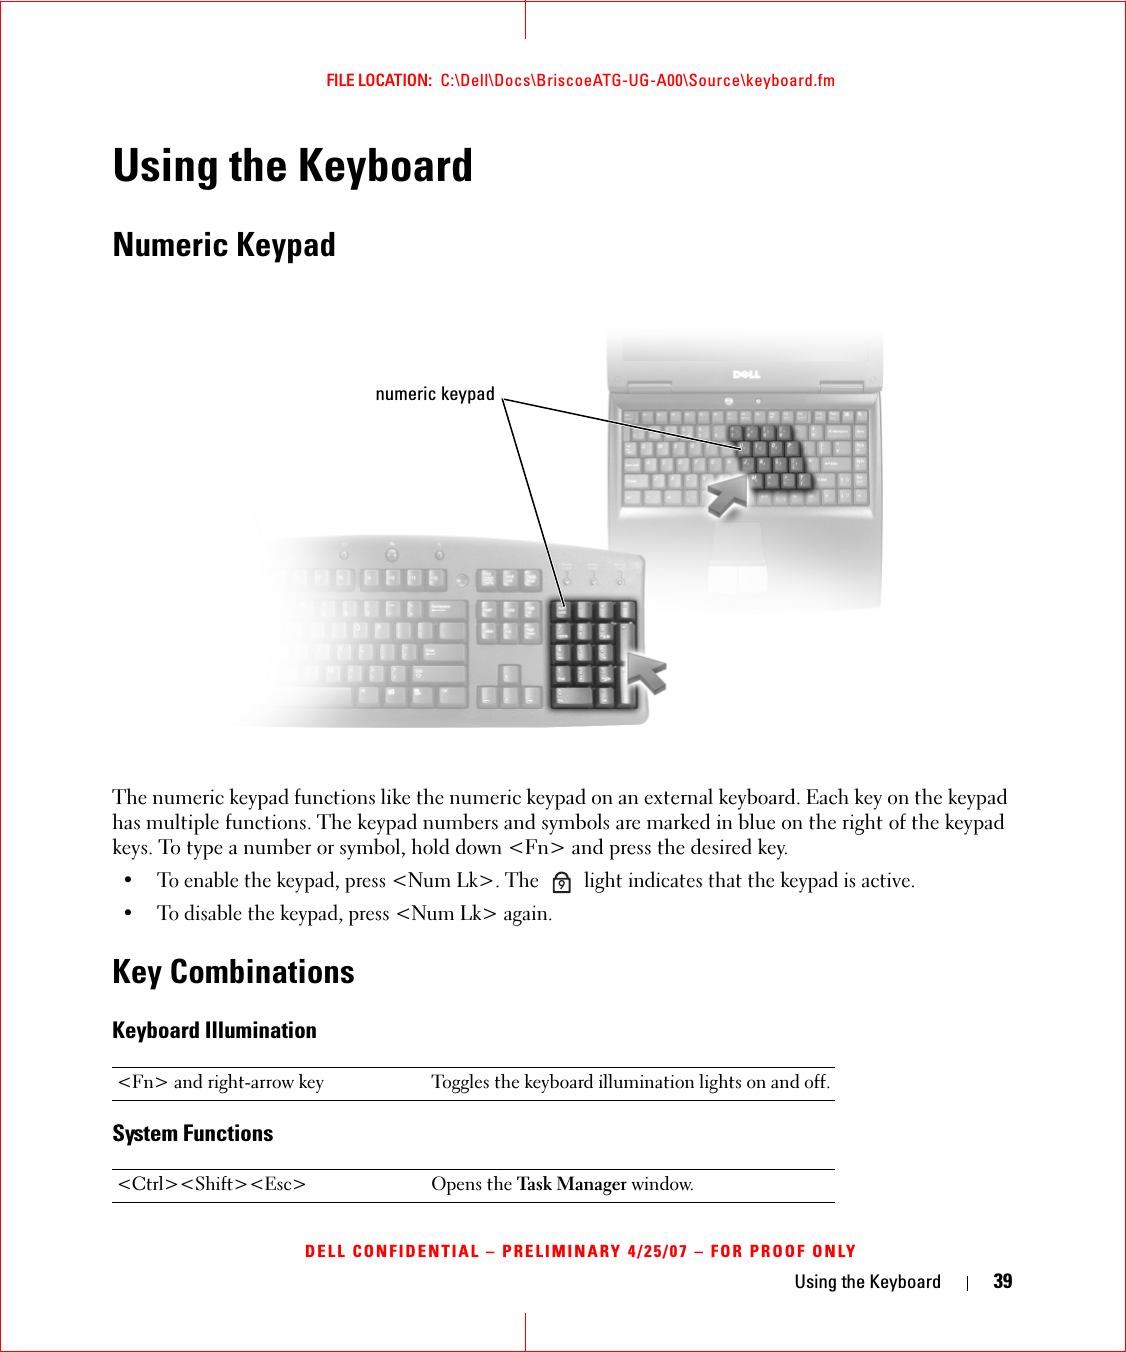 Using the Keyboard 39FILE LOCATION:  C:\Dell\Docs\BriscoeATG-UG-A00\Source\keyboard.fmDELL CONFIDENTIAL – PRELIMINARY 4/25/07 – FOR PROOF ONLYUsing the KeyboardNumeric KeypadThe numeric keypad functions like the numeric keypad on an external keyboard. Each key on the keypad has multiple functions. The keypad numbers and symbols are marked in blue on the right of the keypad keys. To type a number or symbol, hold down &lt;Fn&gt; and press the desired key.• To enable the keypad, press &lt;Num Lk&gt;. The   light indicates that the keypad is active.• To disable the keypad, press &lt;Num Lk&gt; again. Key CombinationsKeyboard IlluminationSystem Functions&lt;Fn&gt; and right-arrow key Toggles the keyboard illumination lights on and off.&lt;Ctrl&gt;&lt;Shift&gt;&lt;Esc&gt; Opens the Task Manager window.numeric keypad9